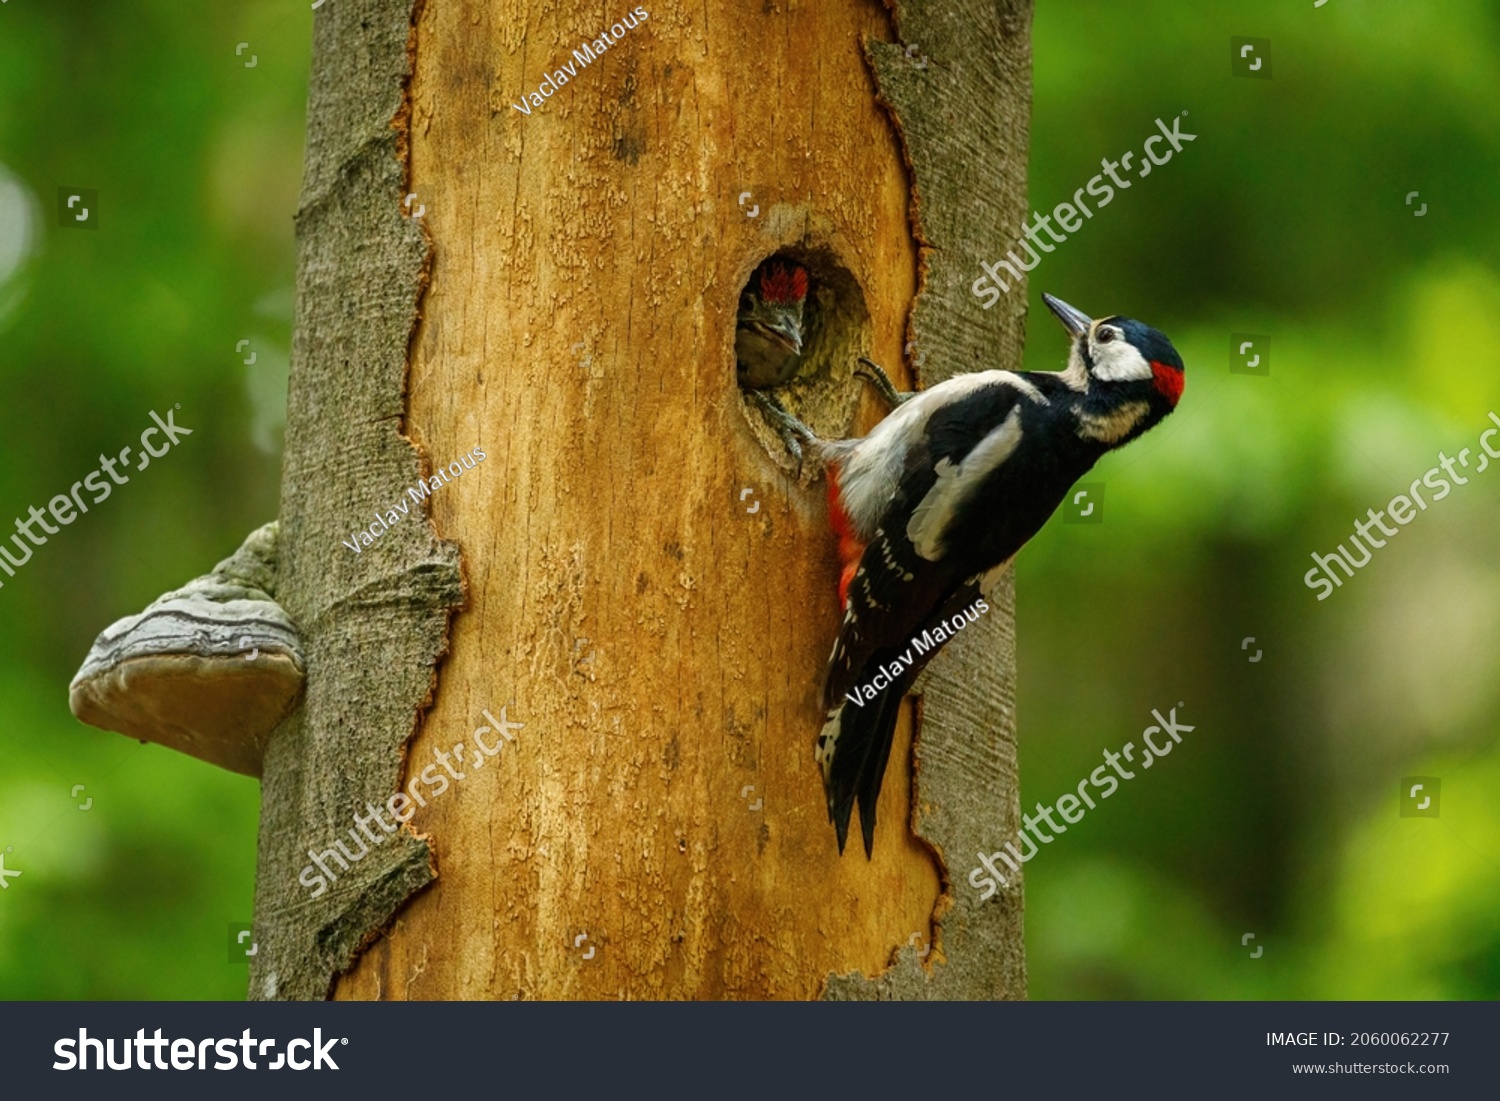 Great spotted woodpecker, Dendrocopos major, perched in nesting hole in old rotten beech trunk. Male of woodpecker feeds chicks in nest. Bird breeding season. Green forest. Spring in wild nature. #2060062277